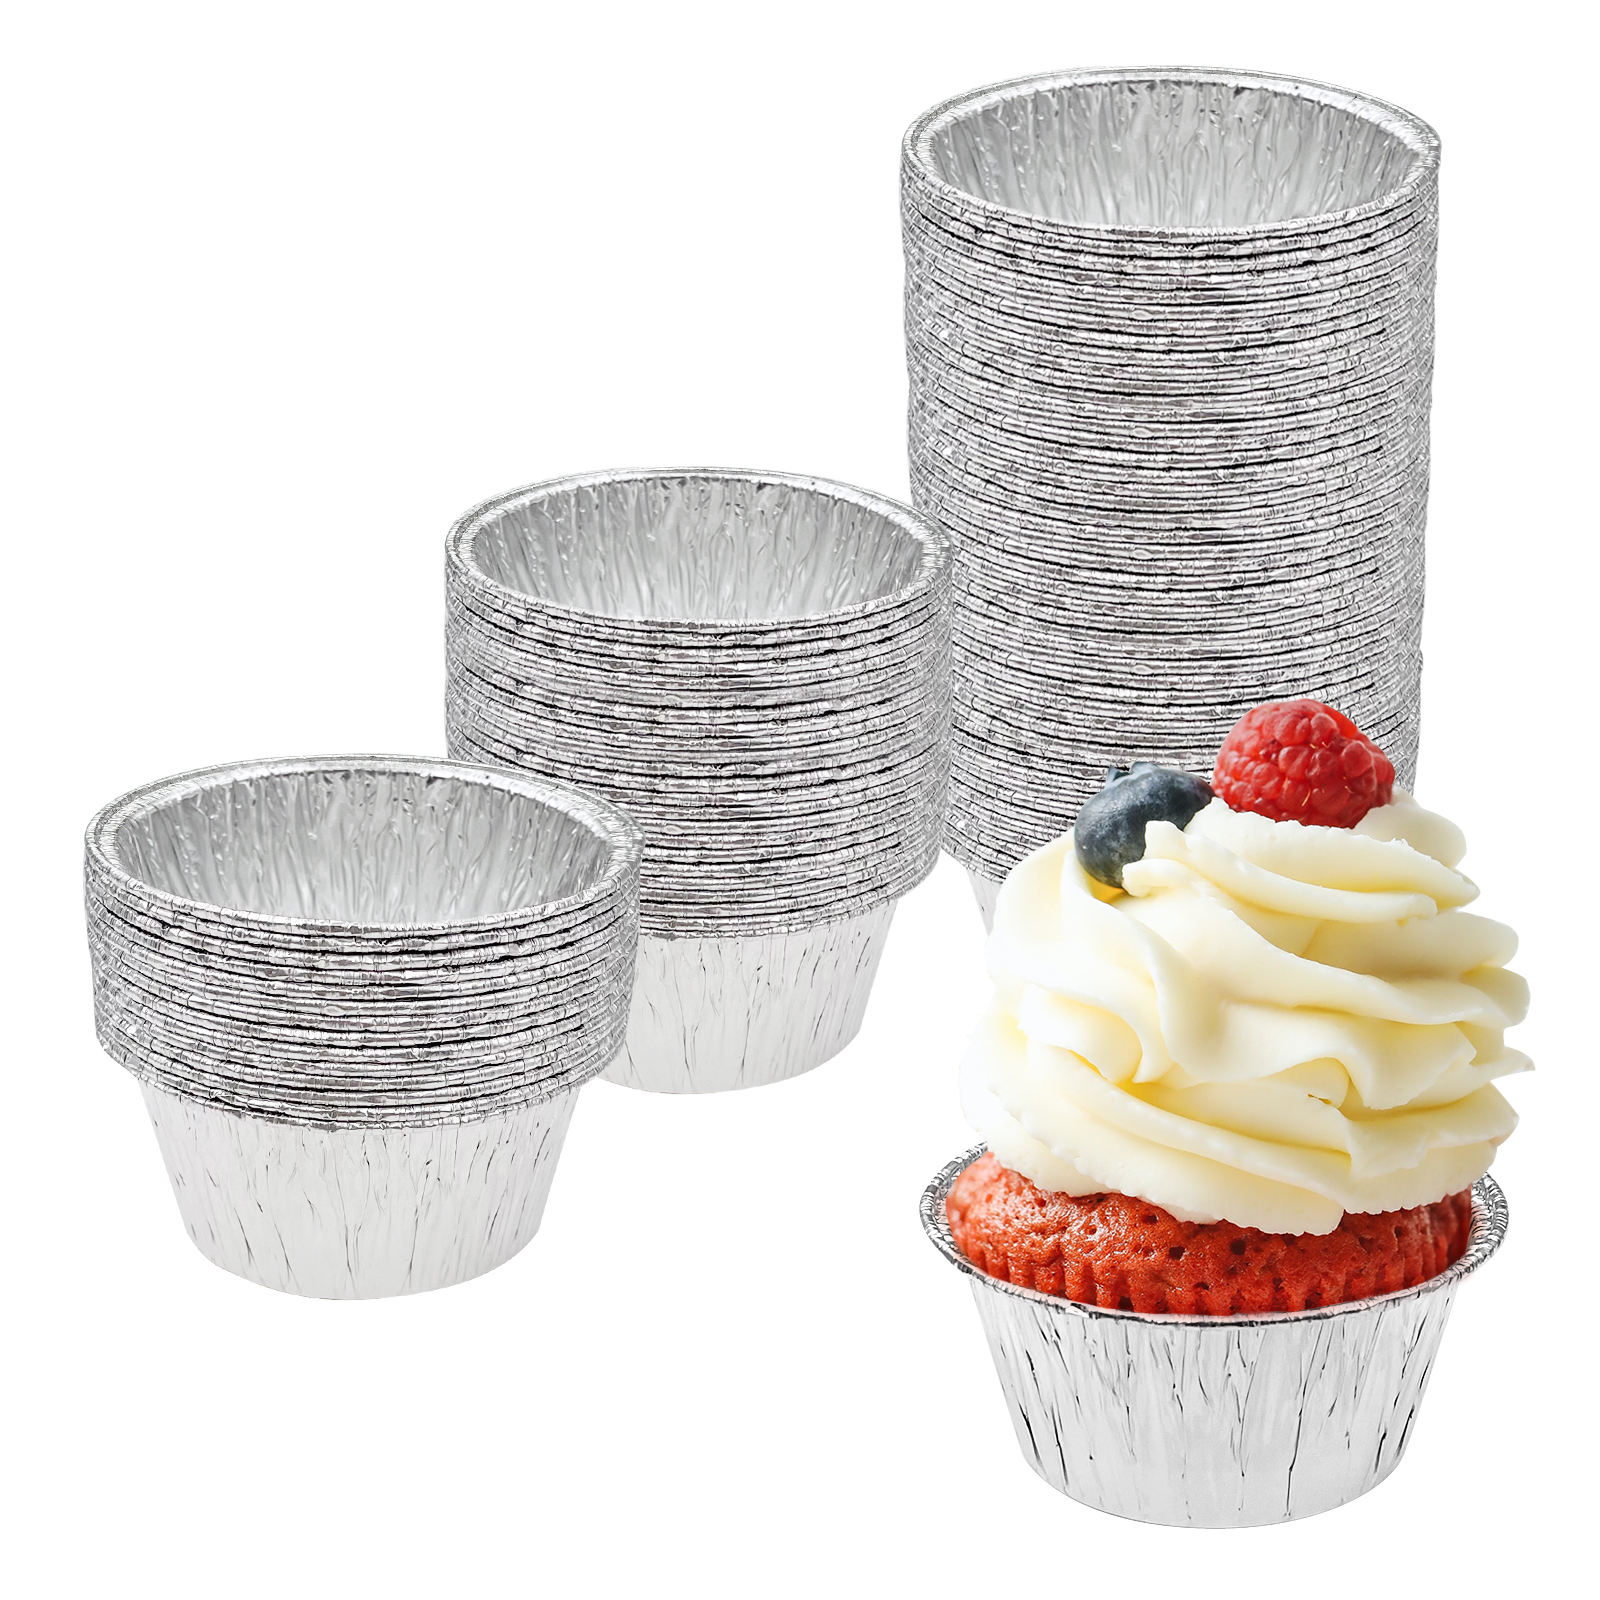 110 Pcs Silver Foil Baking Cups Muffin Liners for Baking, Cupcake, Pudding, Egg Tart, Creme Brulee-YAOAWE